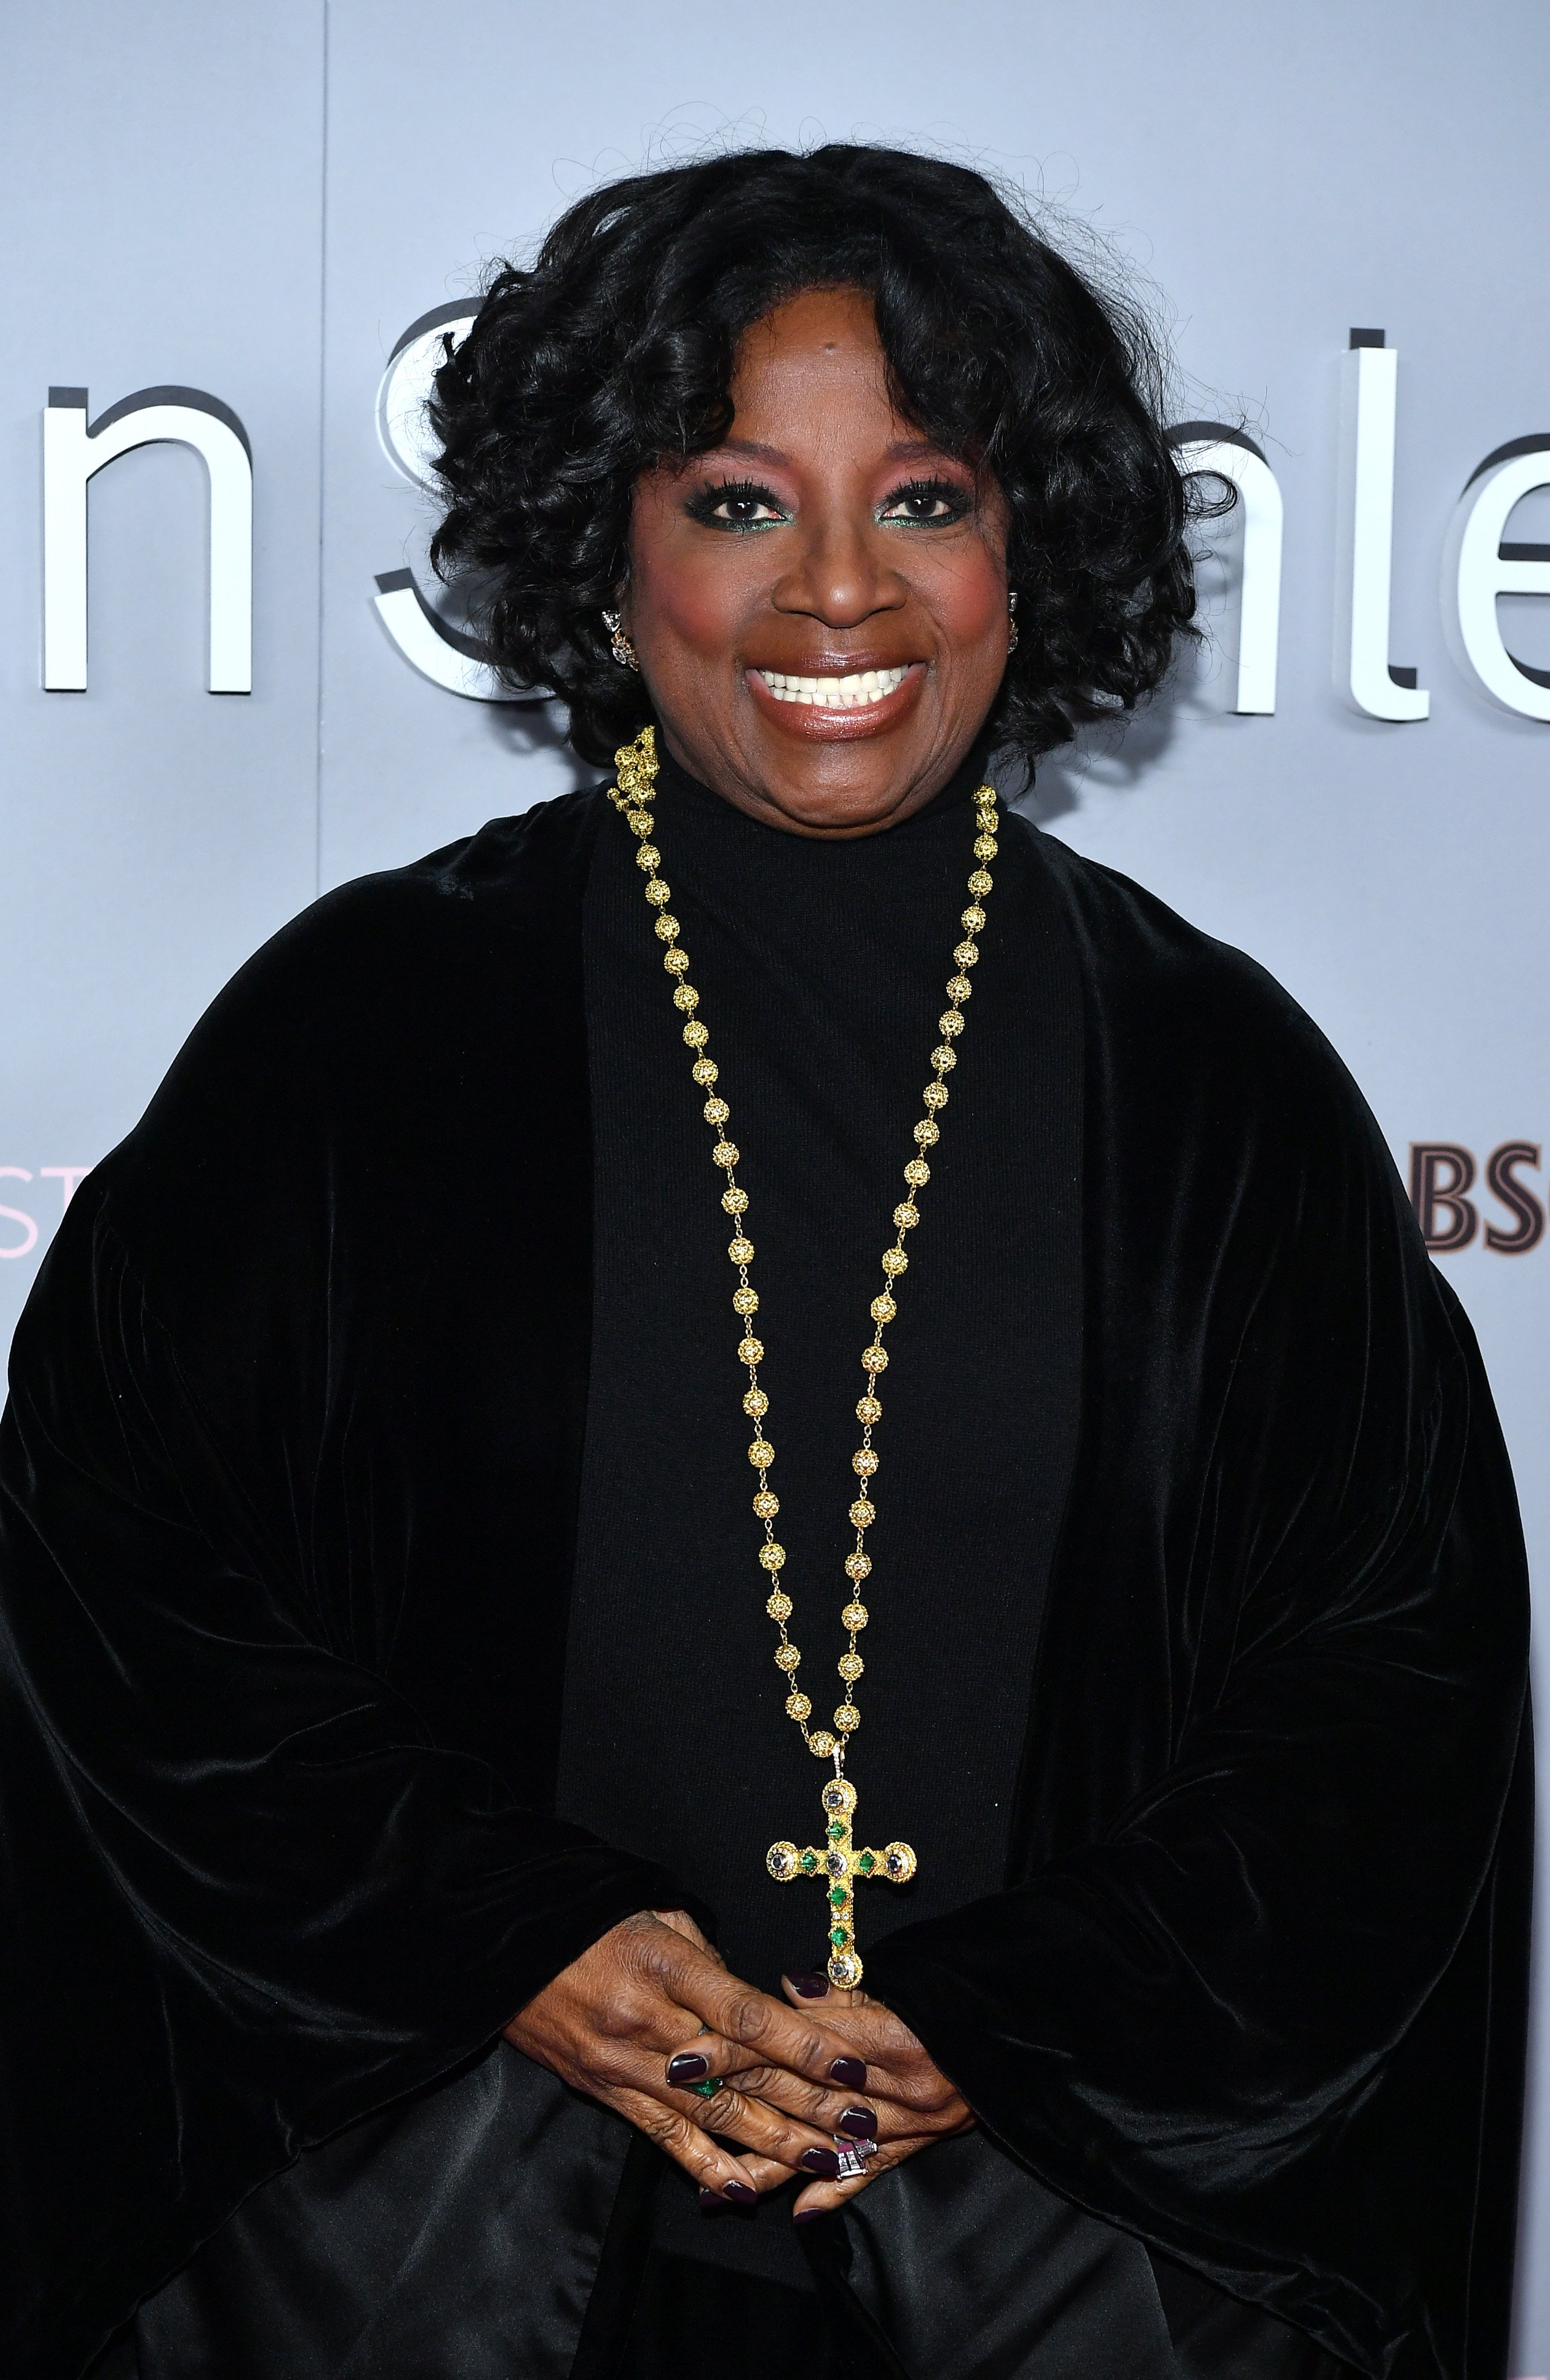 LaTanya Richardson attends Alfre Woodard's 11th Annual Sistahs' Soirée Presented by Morgan Stanley With Absolut Elyx on February 05, 2020 in Los Angeles, California. | Source: Getty Images